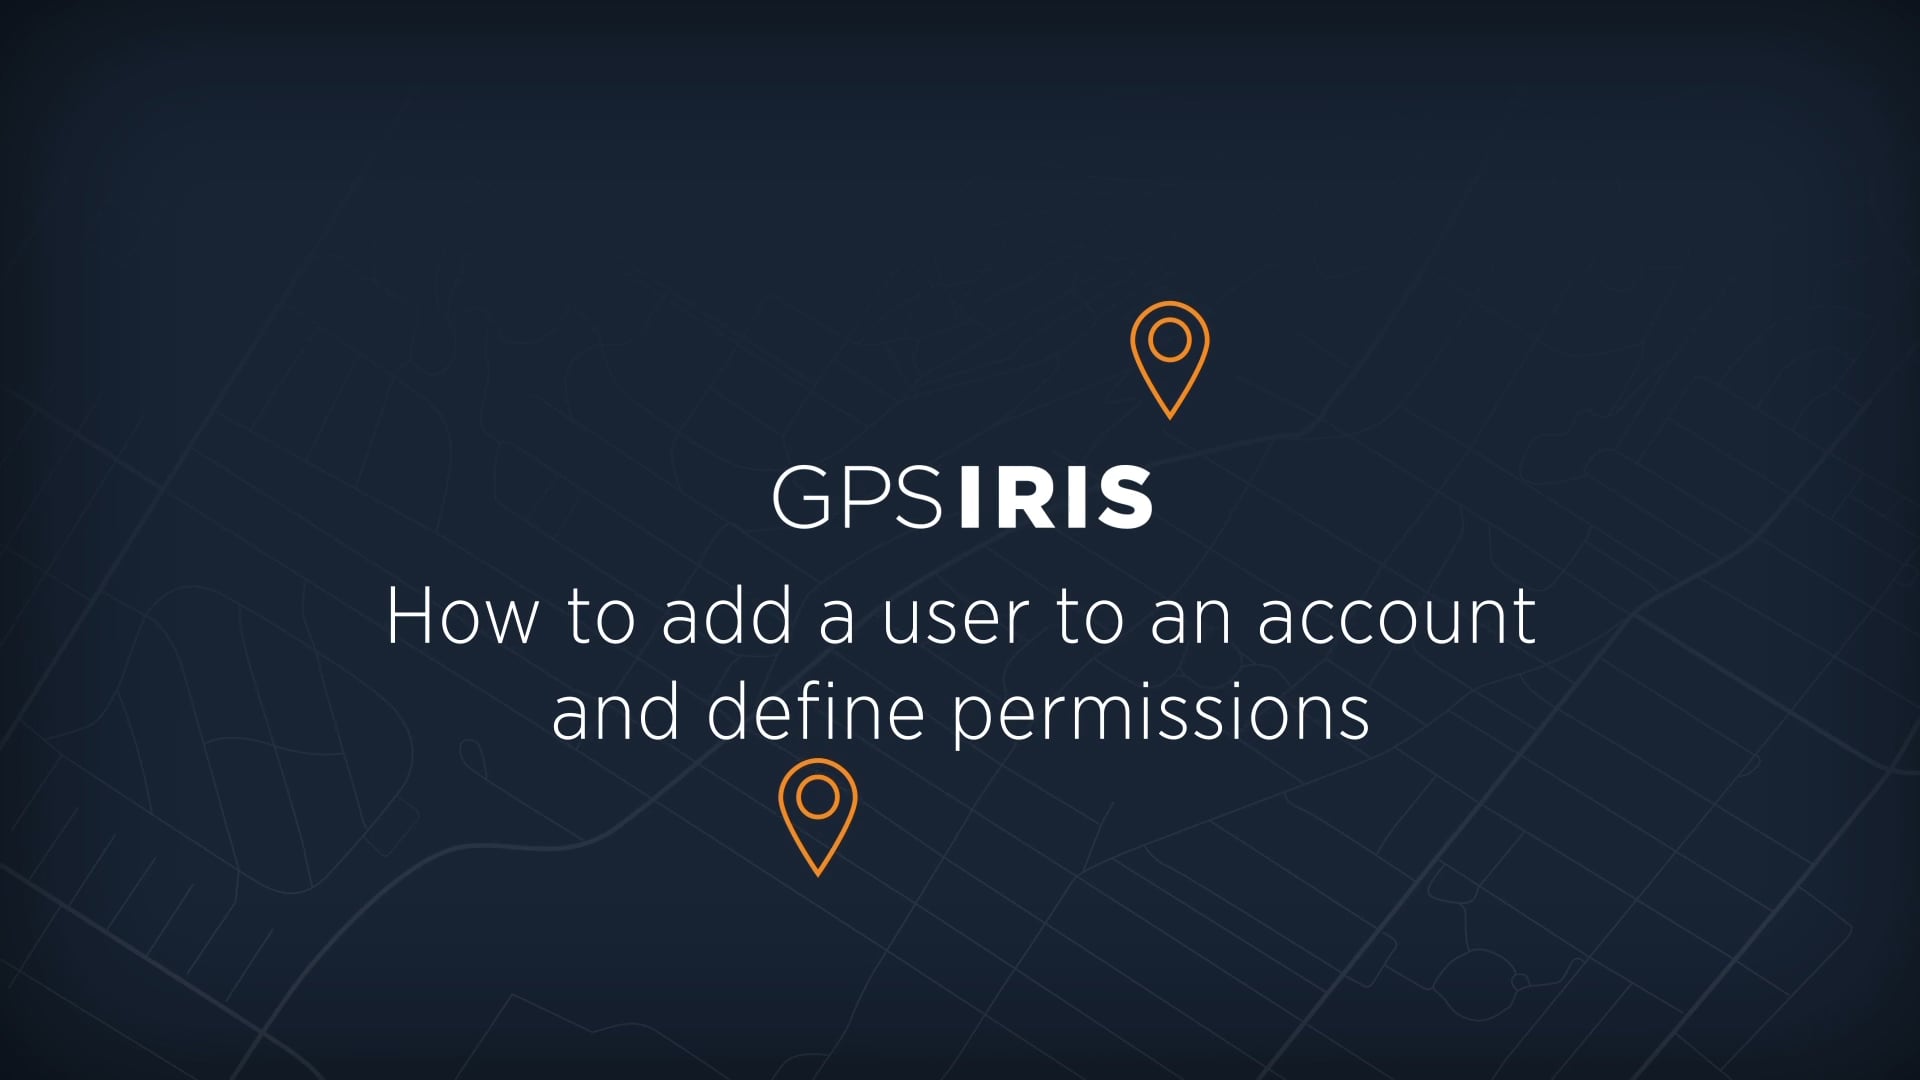 How to add a new user and define permissions